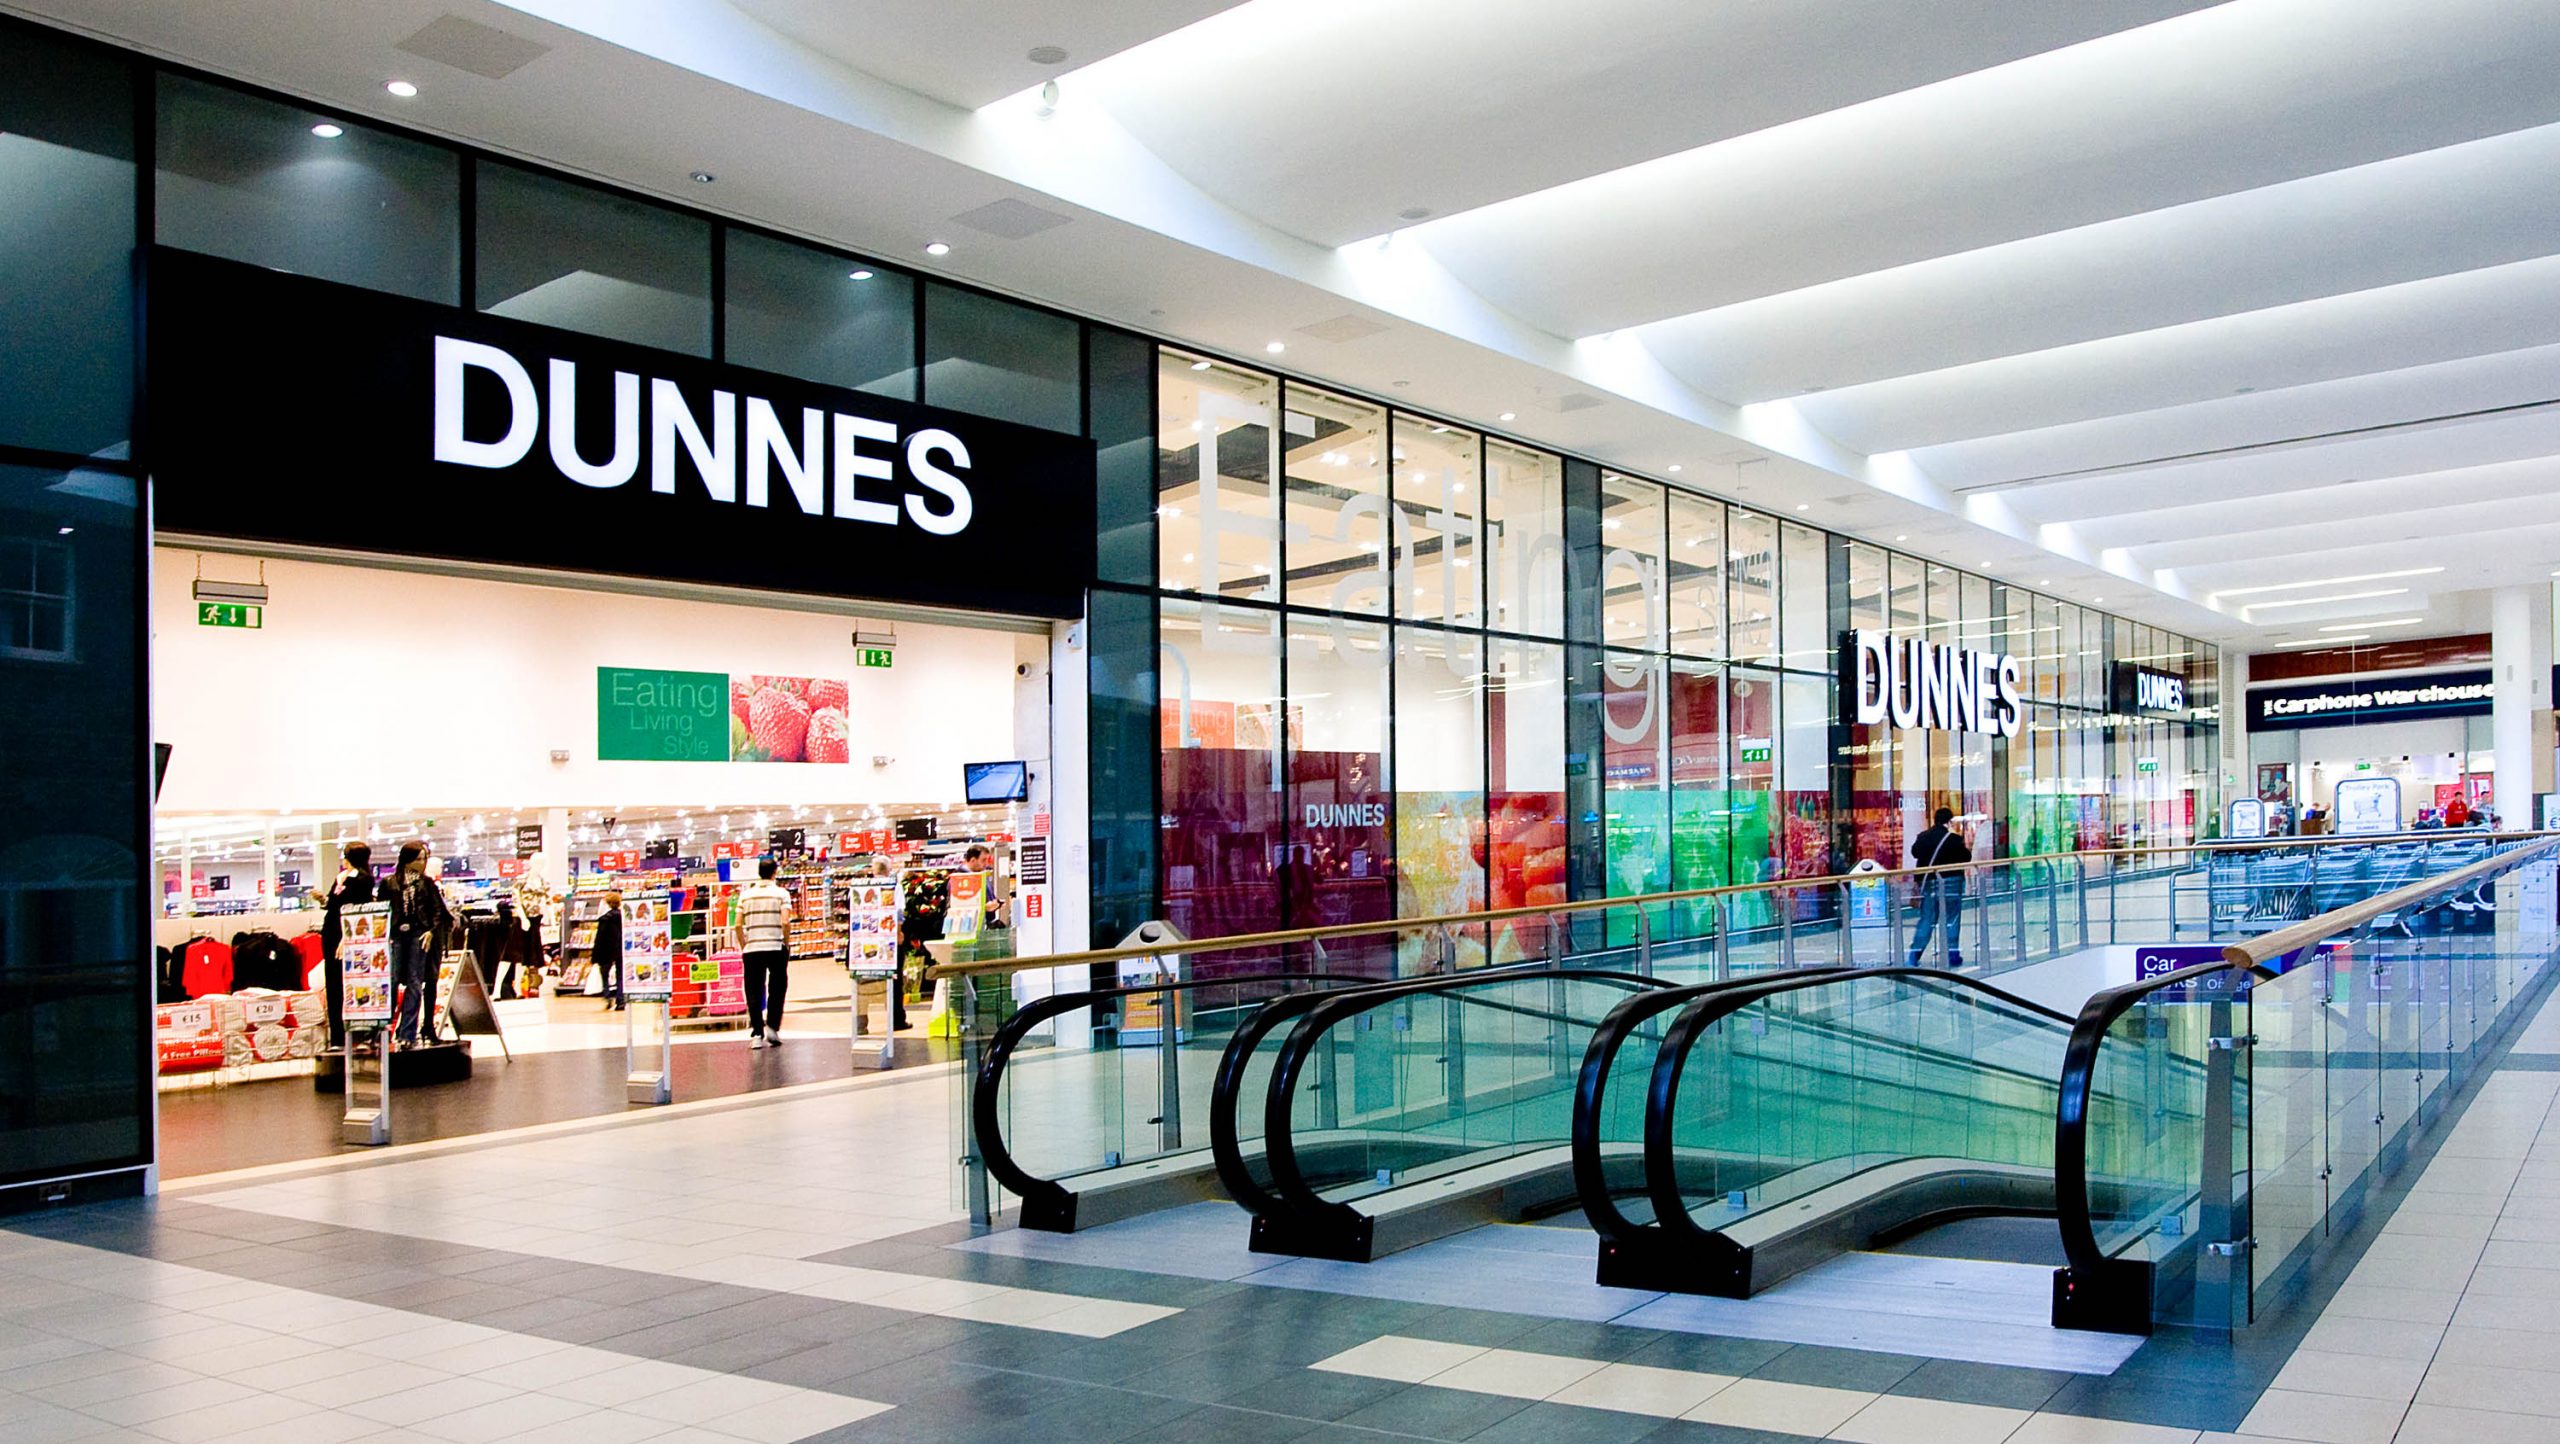 5. Dunnes Stores Alcohol Promotions - wide 6